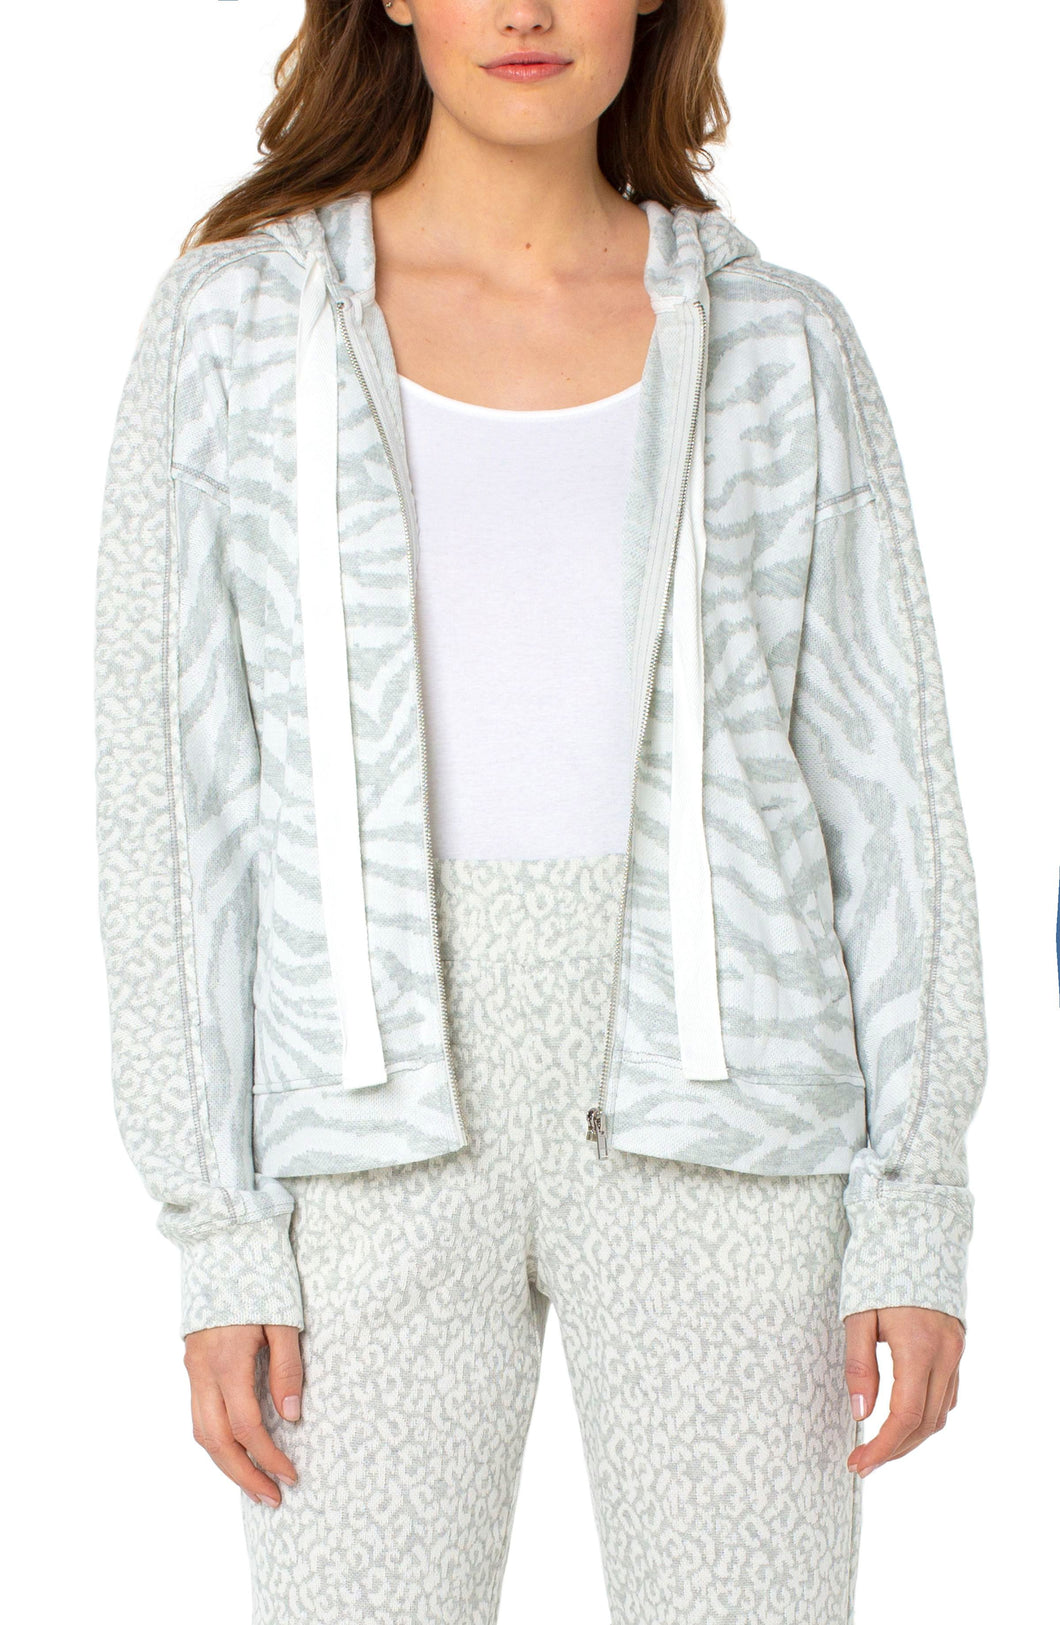 A soft and comfortable fabric, along with a stylish pattern, makes our Zora jacket a must have for the cooler months.  Layer over a white or gray top and pair with your favorite jean or if you are looking for a complete fashionable set, pair with our WINDAM PULL ON WIDE LEG PANT WITH DRAWSTRING IN ZEBRA JACQUARD. Color- White and gray. Jacquard fabrication. Set in hooded neckline with drawstring. Long drop shoulder sleeves.